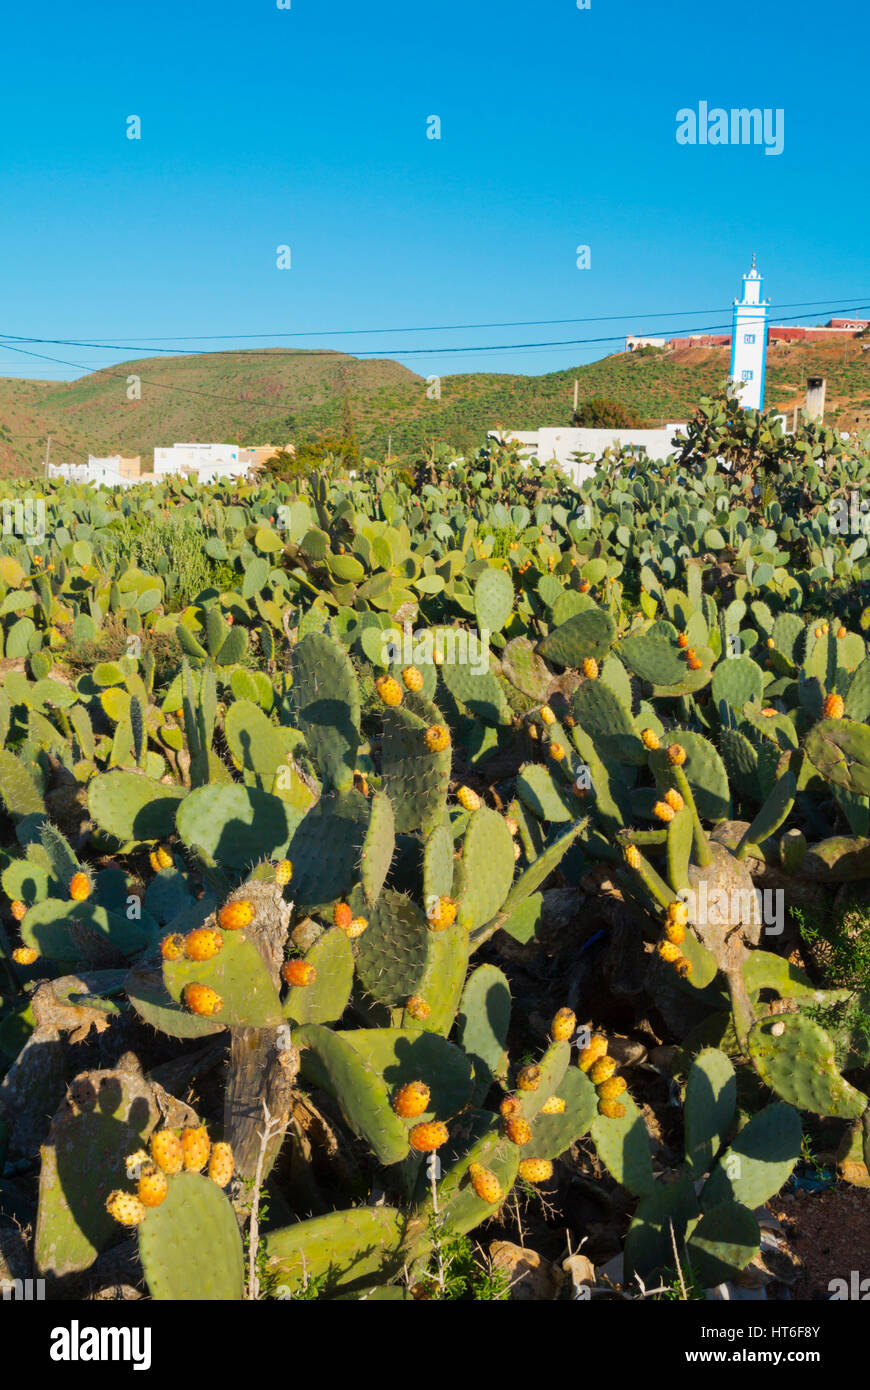 Opuntia, prickly pears, Mirleft, southern Morocco Stock Photo